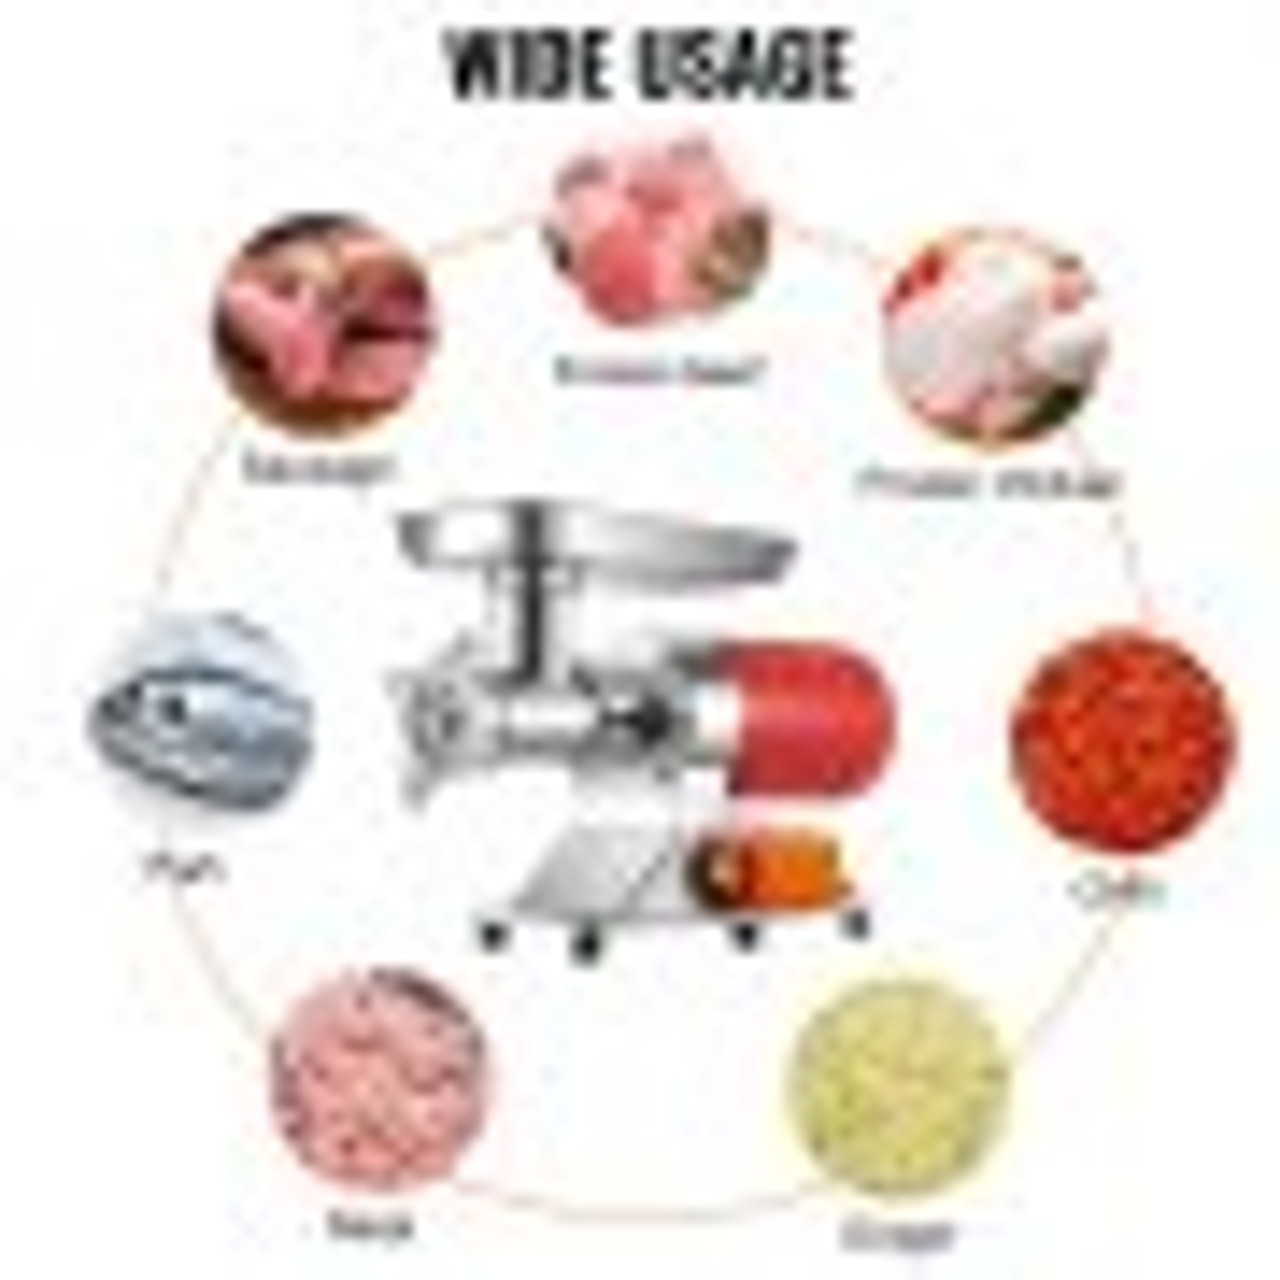 Electric Meat Grinder, 551 Lbs/Hour 850W Meat Grinder Machine, 1.16 HP  Electric Meat Mincer with